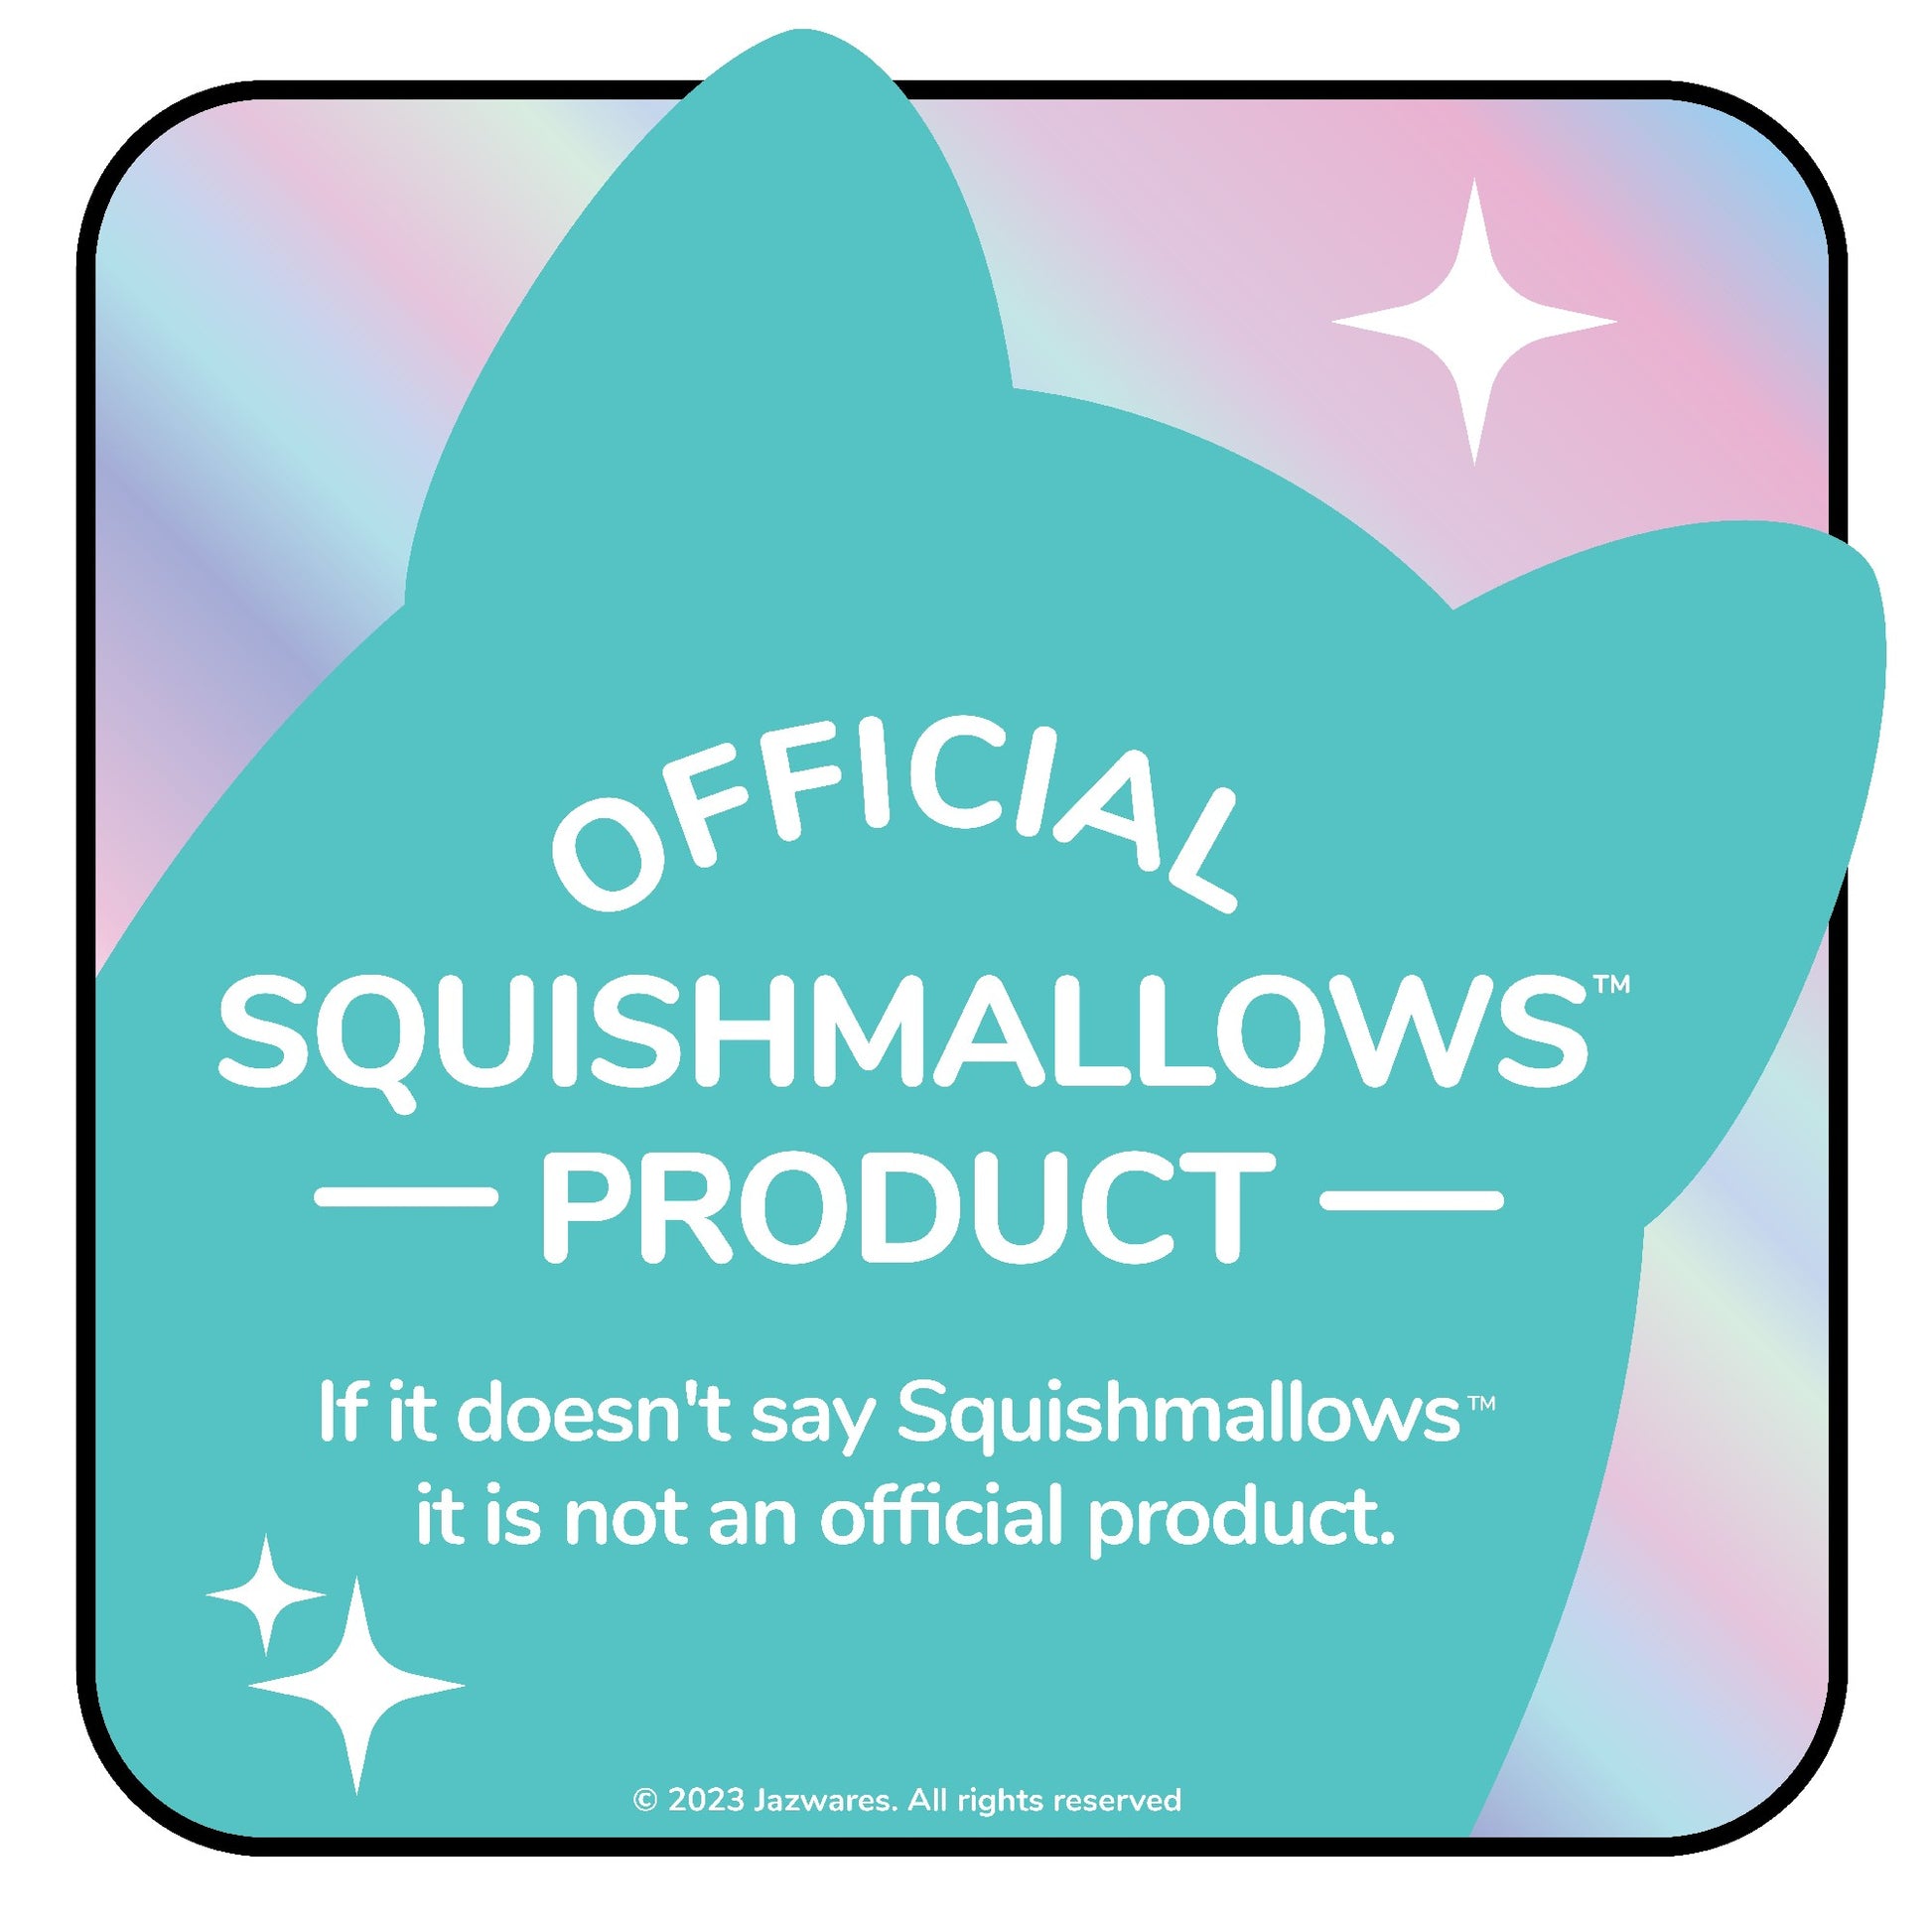 Squishmallows Leigh the Toad 12" Plush